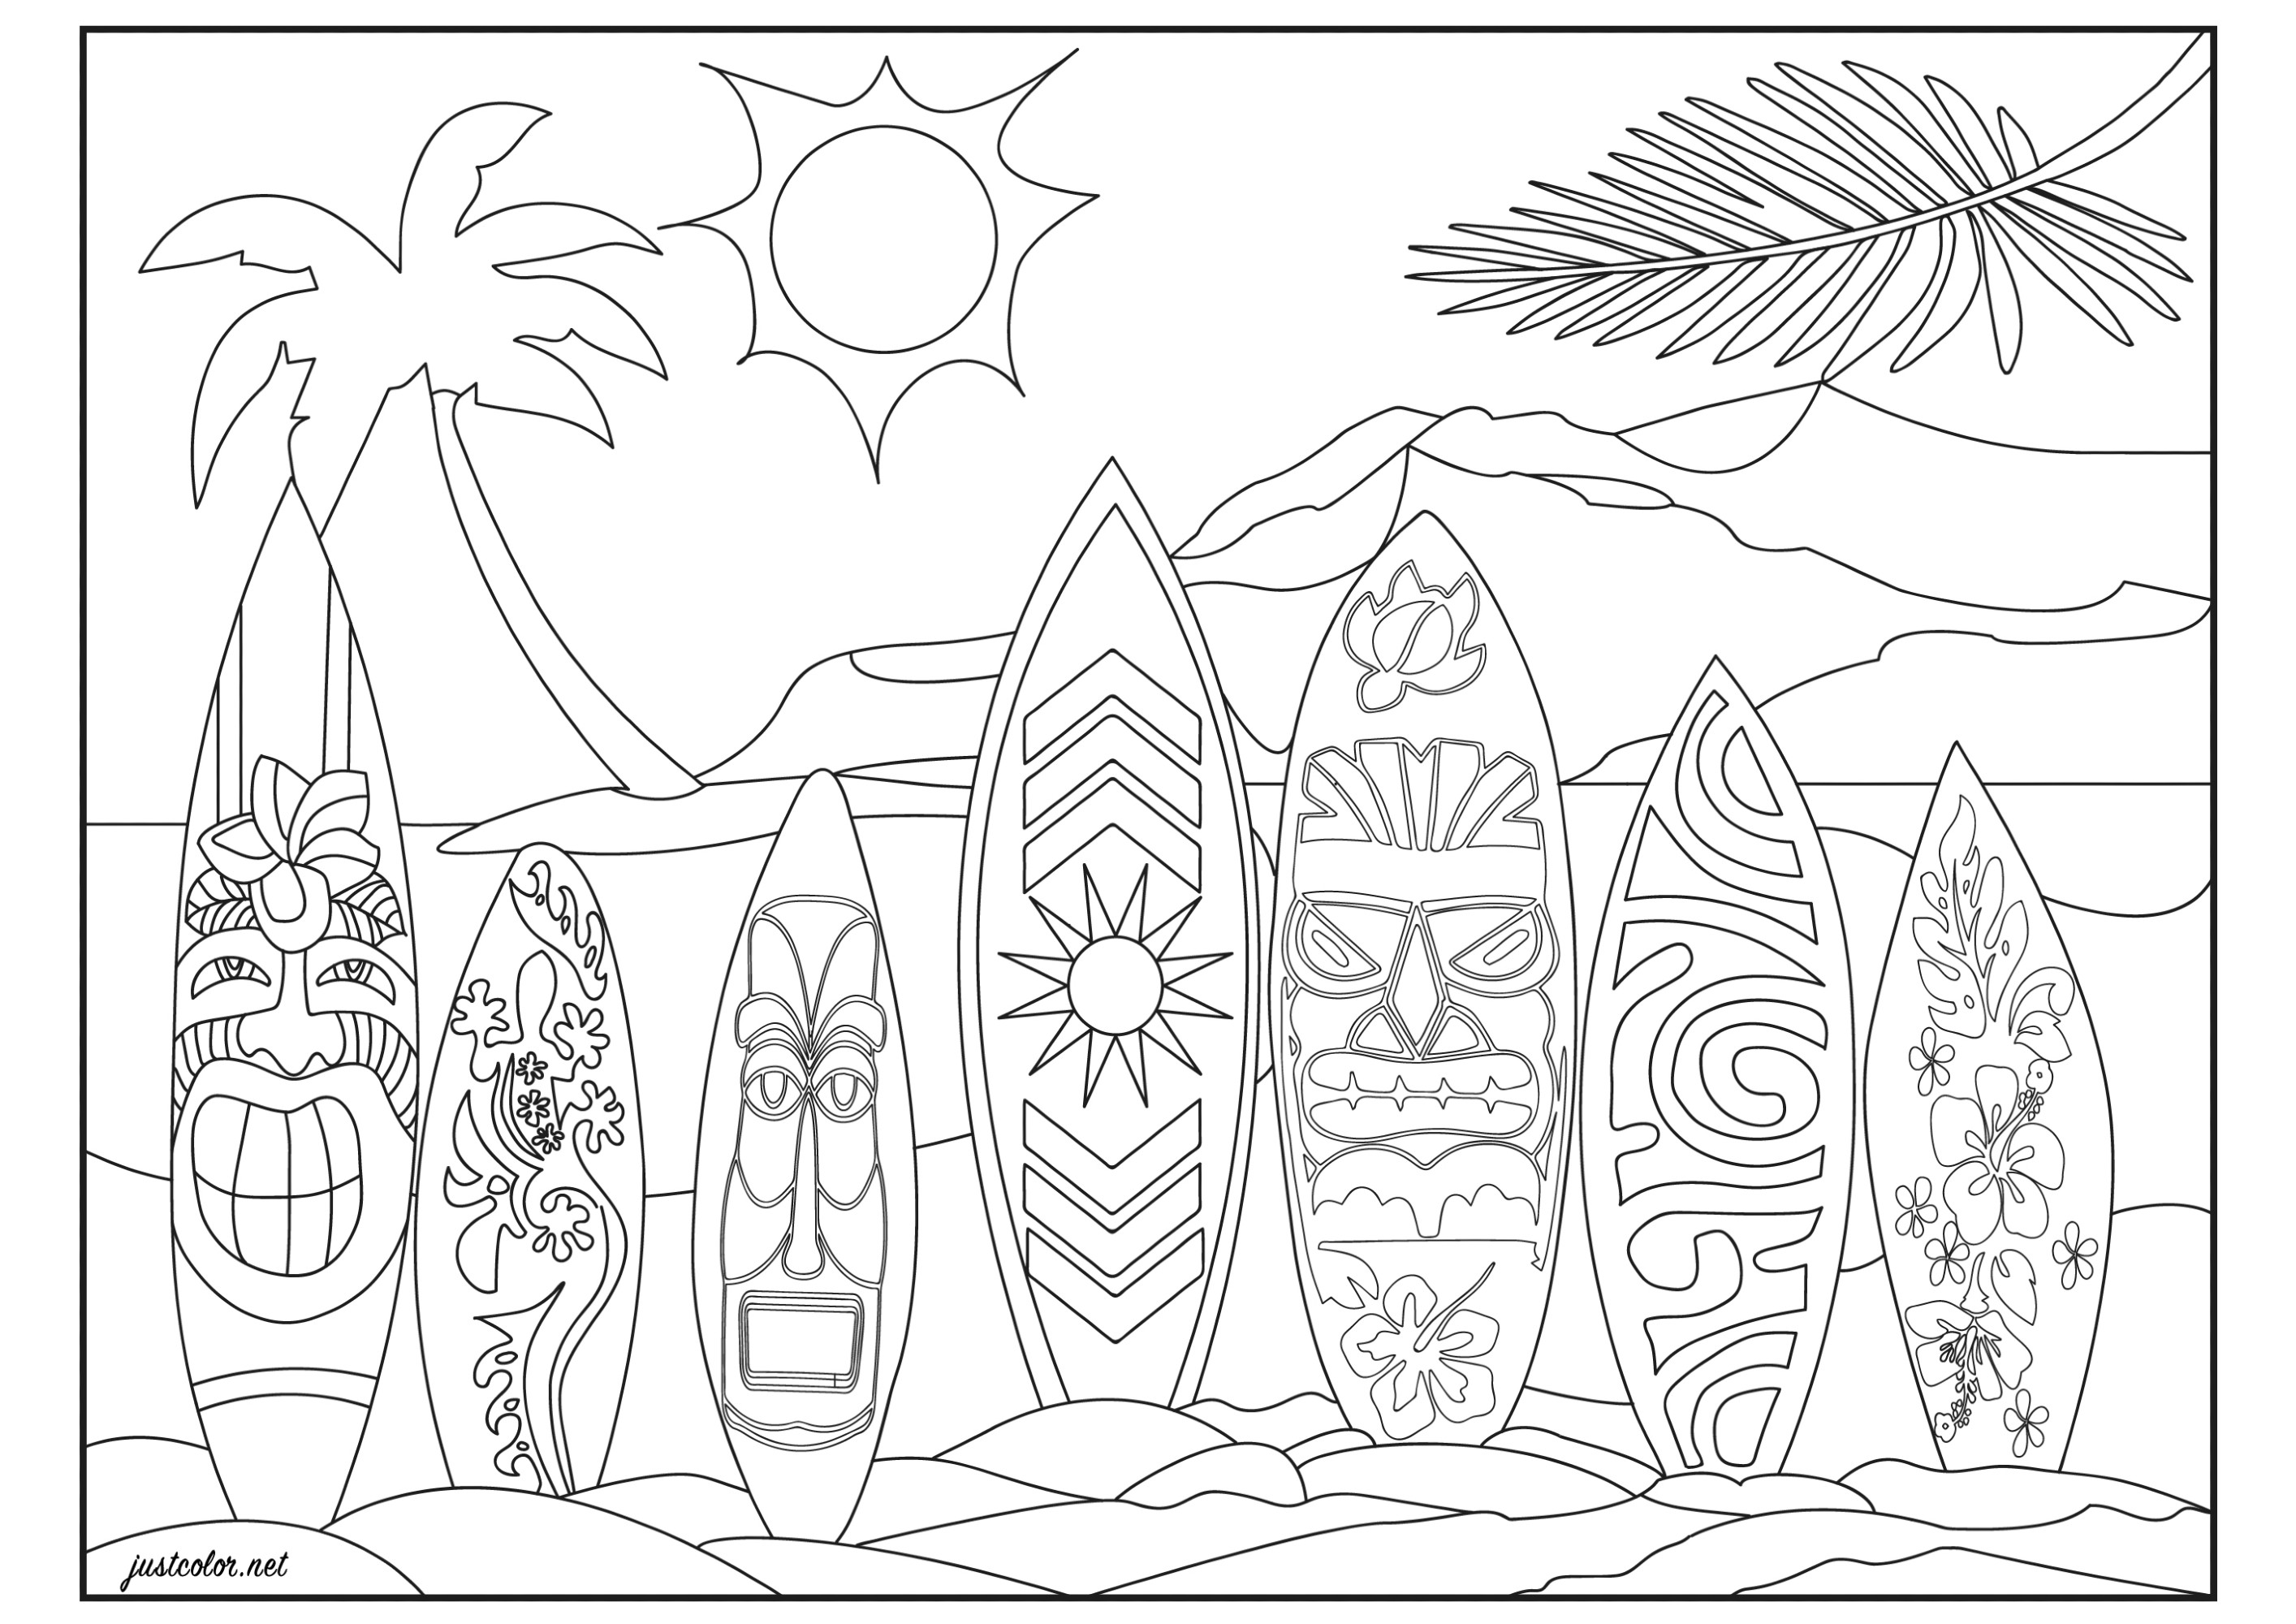 Hawaii in the Pacific, on a beach in Honolulu : alignment of surfboards with Hawaiian, Maori, vintage, tribal and floral (tropical hibiscus flowers) patterns.  Ready to surf the perfect wave ? Original coloring page with volcanic mountain and coconut palm in the background.